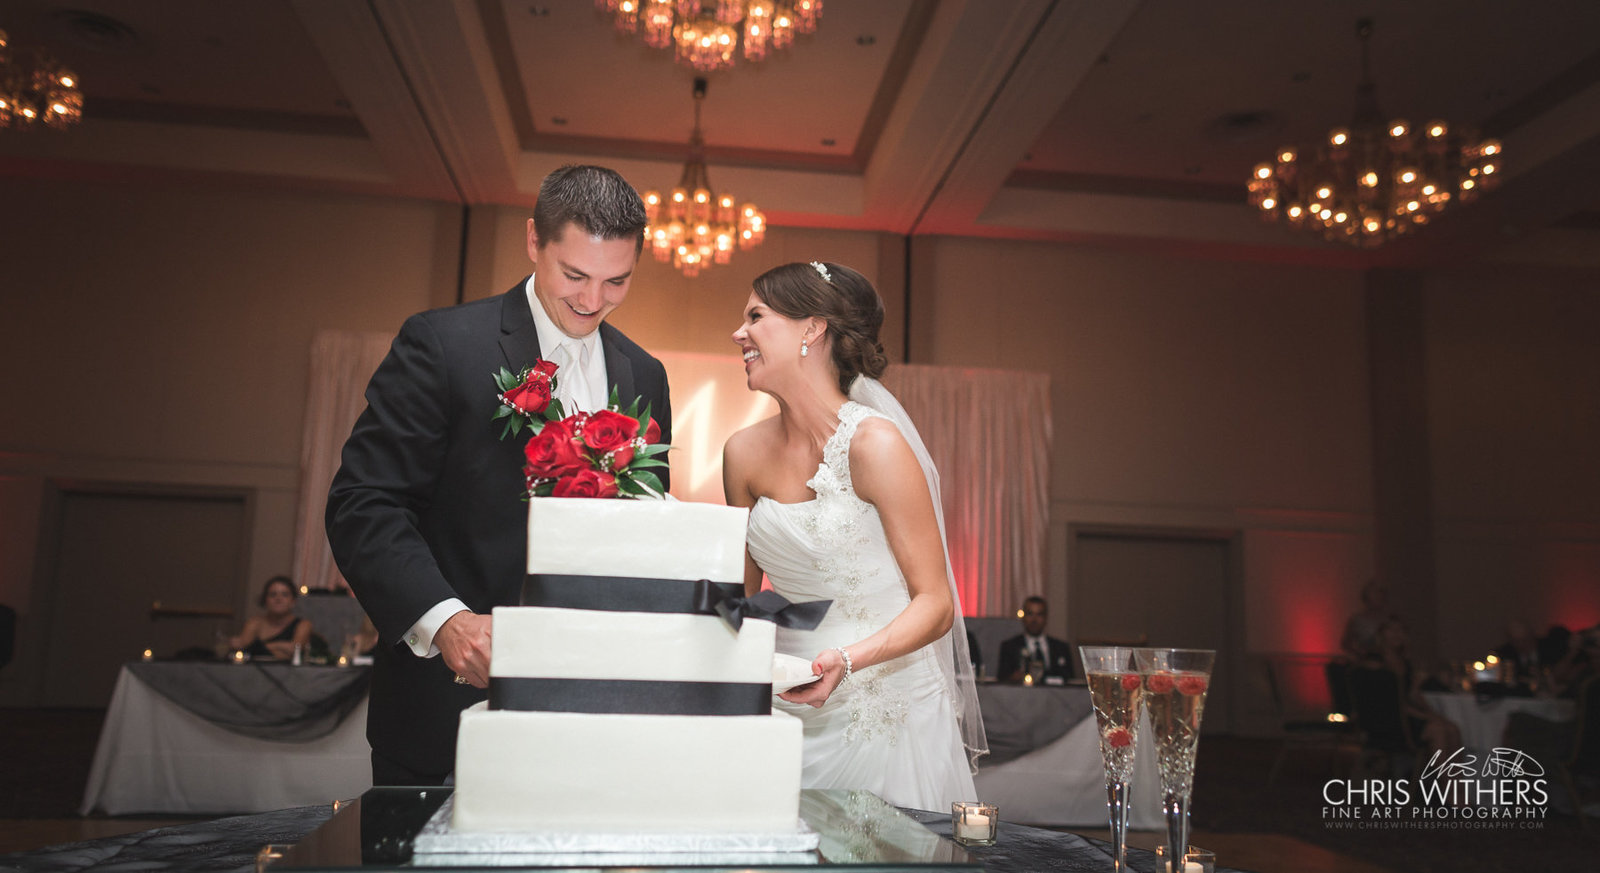 Springfield Illinois Wedding Photographer - Chris Withers Photography (13 of 16)